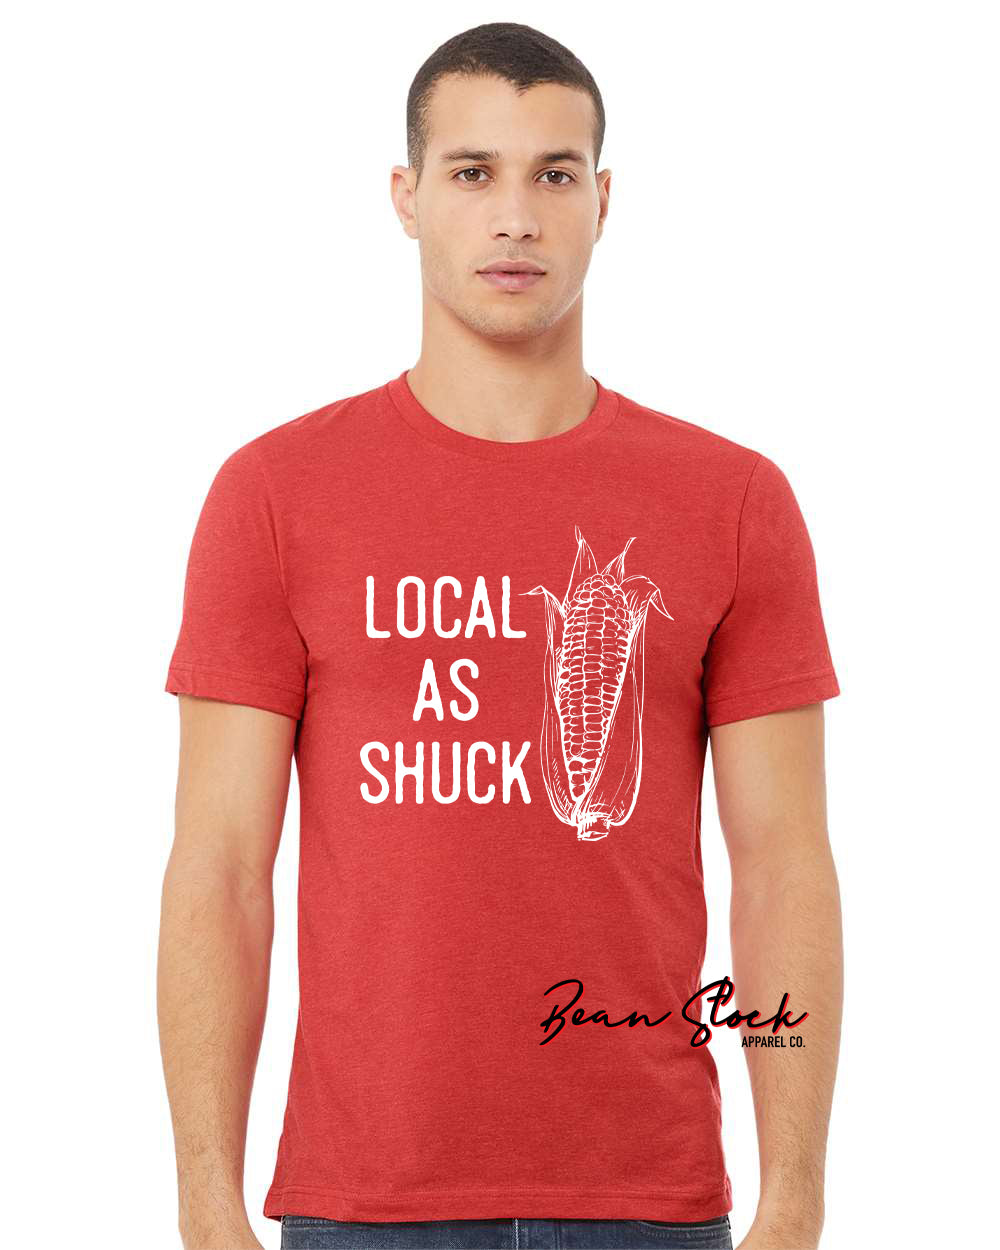 Local As Shuck - White Font